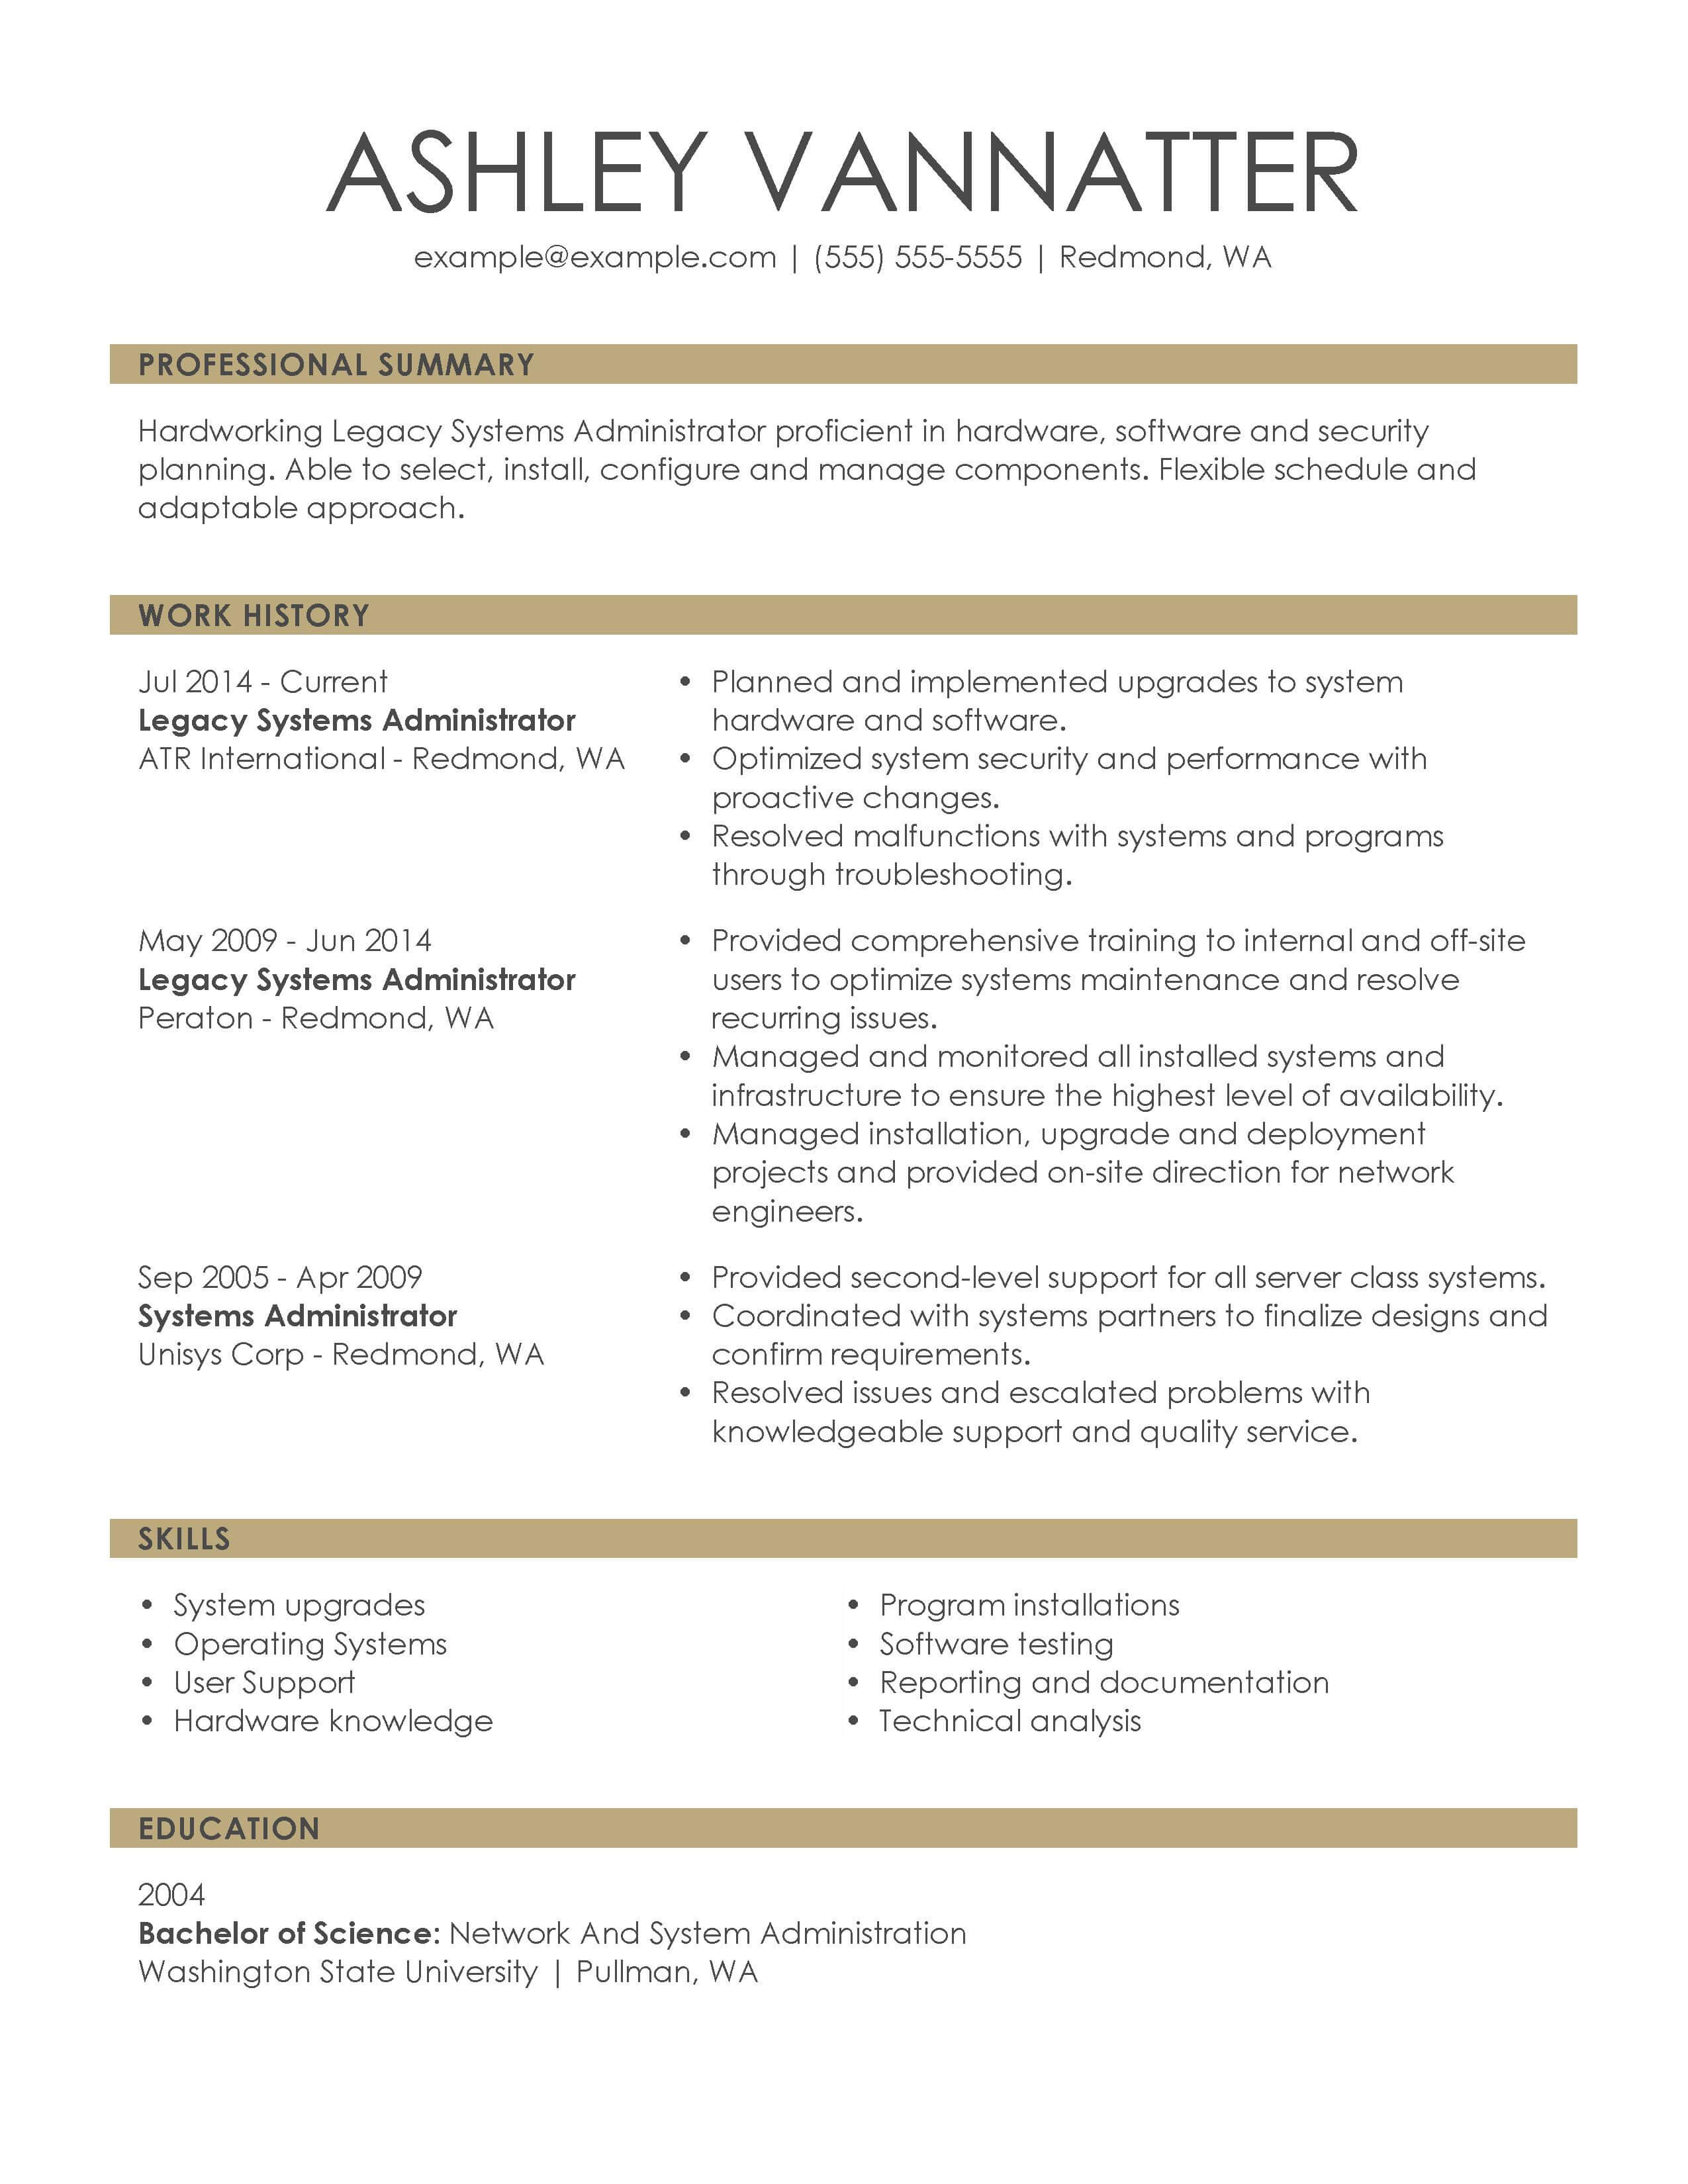 Professional Resume Examples Chronological Executive Legacy Systems Administrator professional resume examples|wikiresume.com